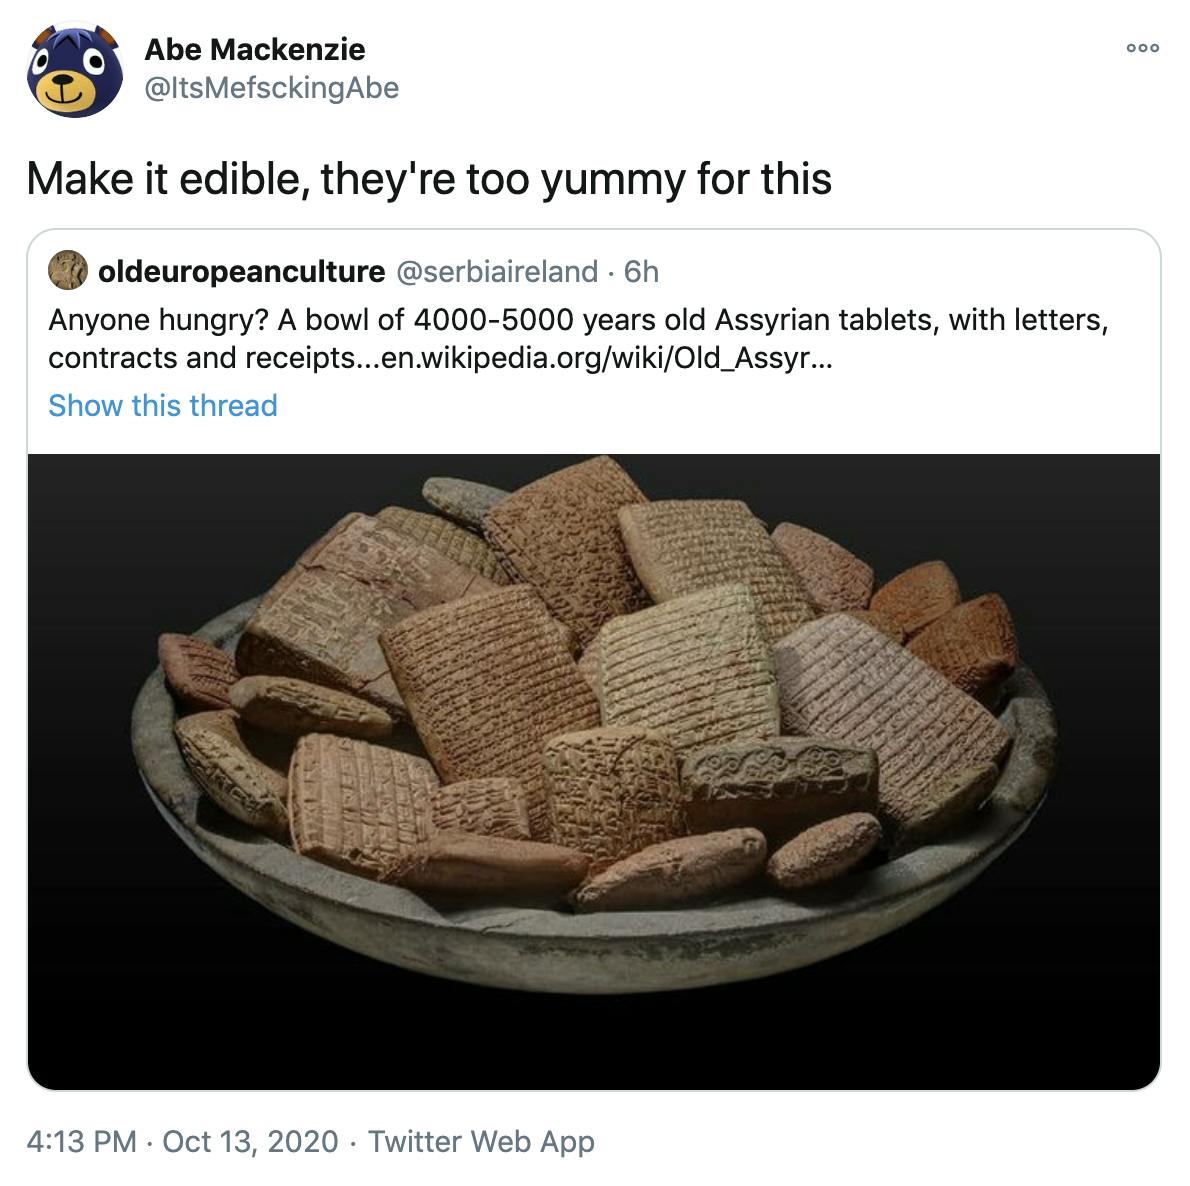 'Make it edible, they're too yummy for this' embed of original tweet